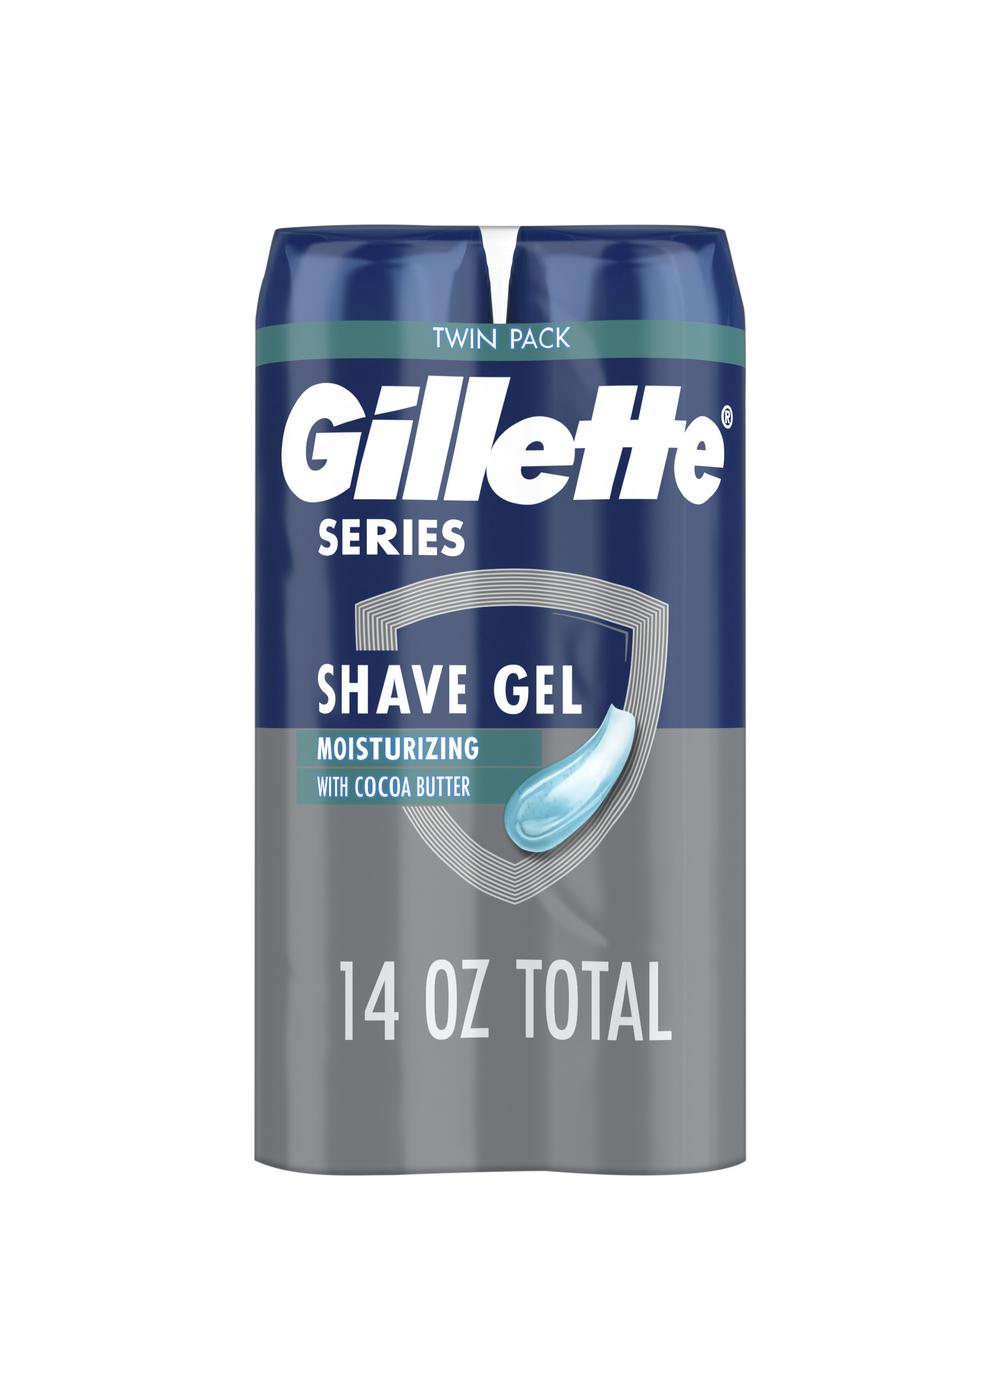 Gillette Series Shave Gel Twin Pack -  Moisturizing; image 2 of 8